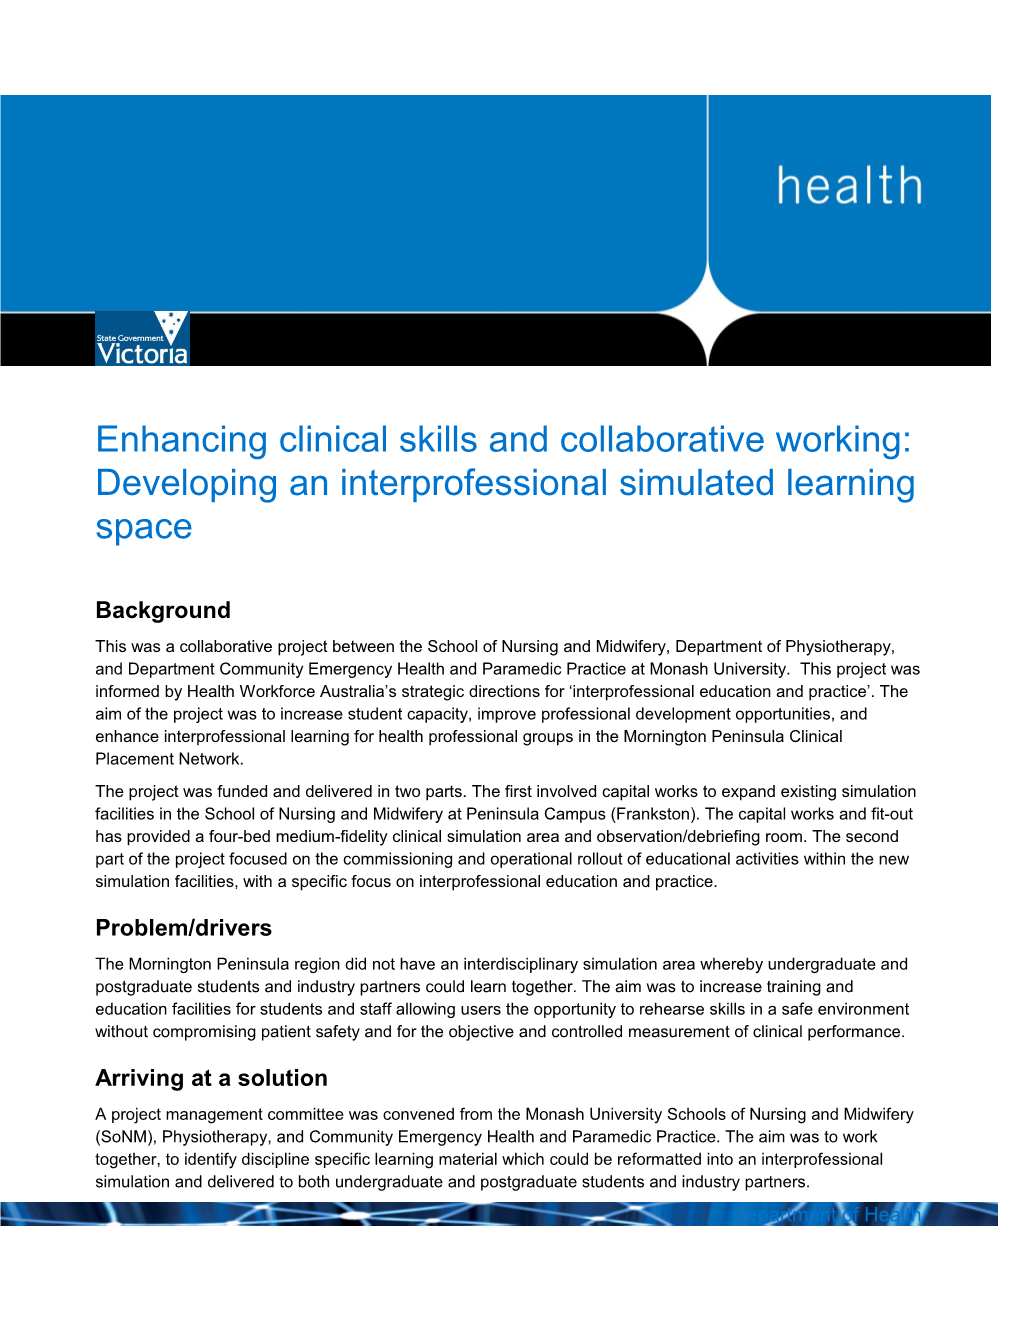 Enhancing Clinical Skills and Collaborative Working: Developing an Interprofessional Simulated